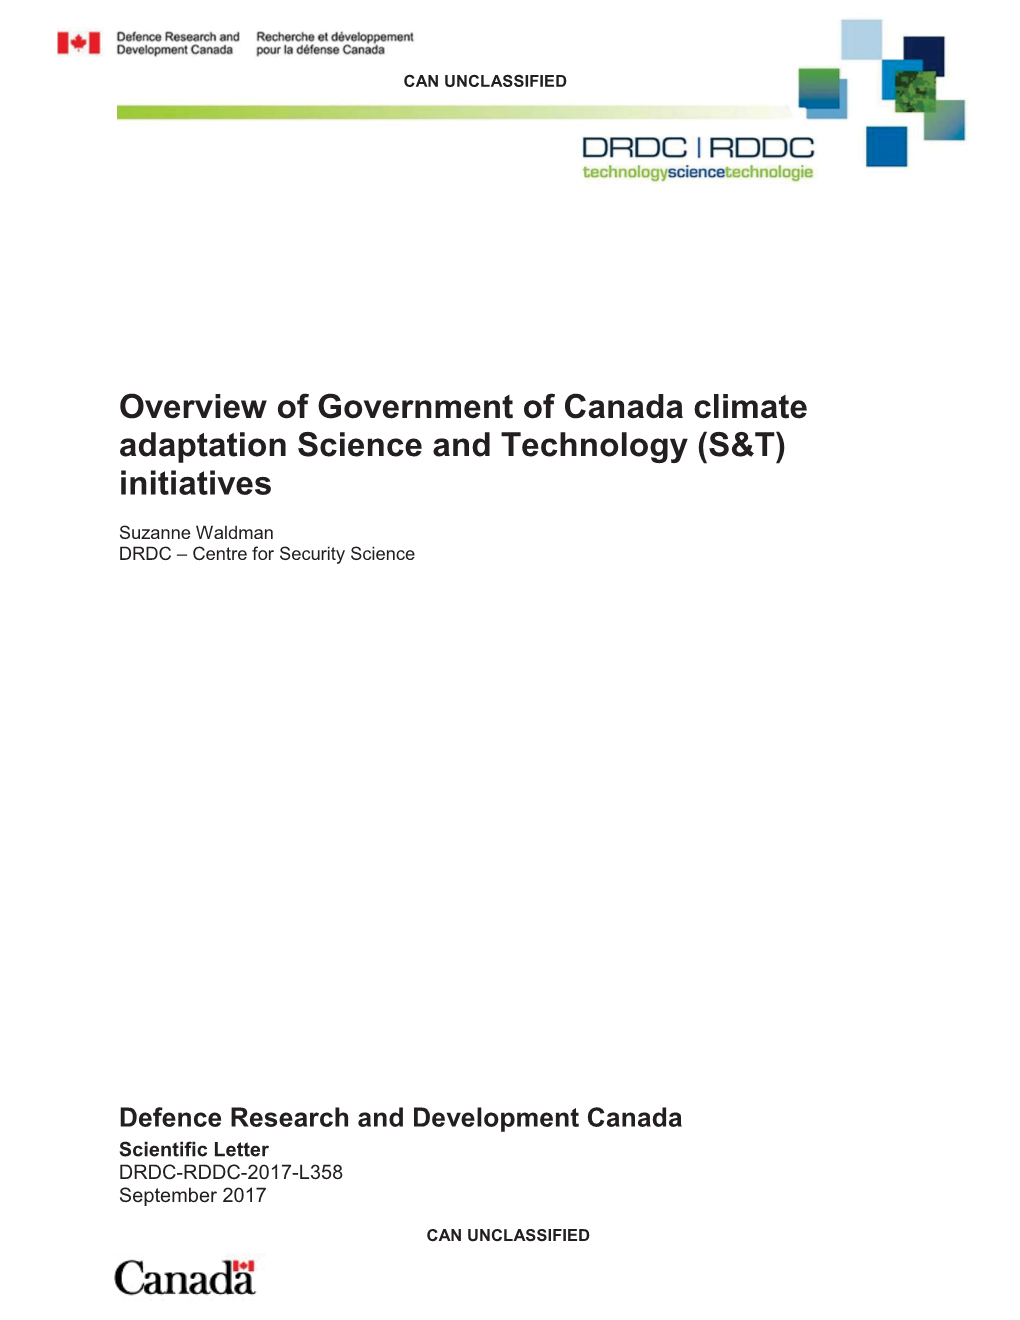 Overview of Government of Canada Climate Adaptation S&T Initiatives